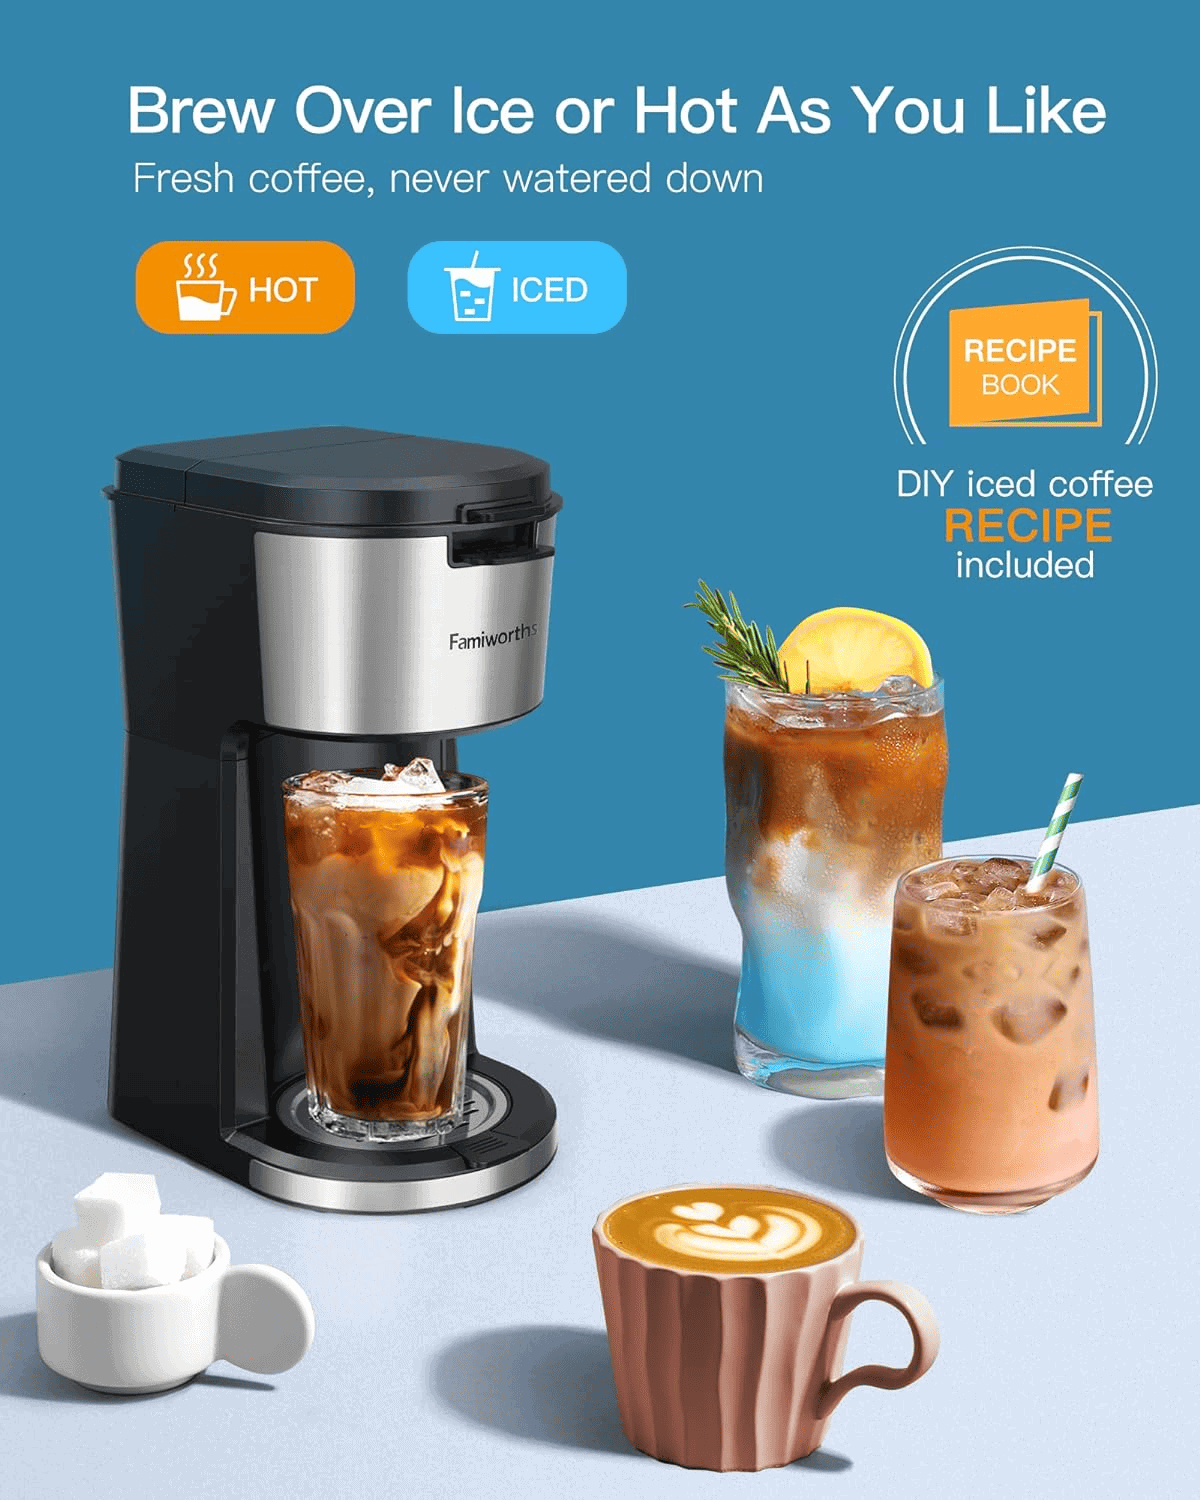 A Famiworths Iced Coffee Maker with a cup of iced coffee